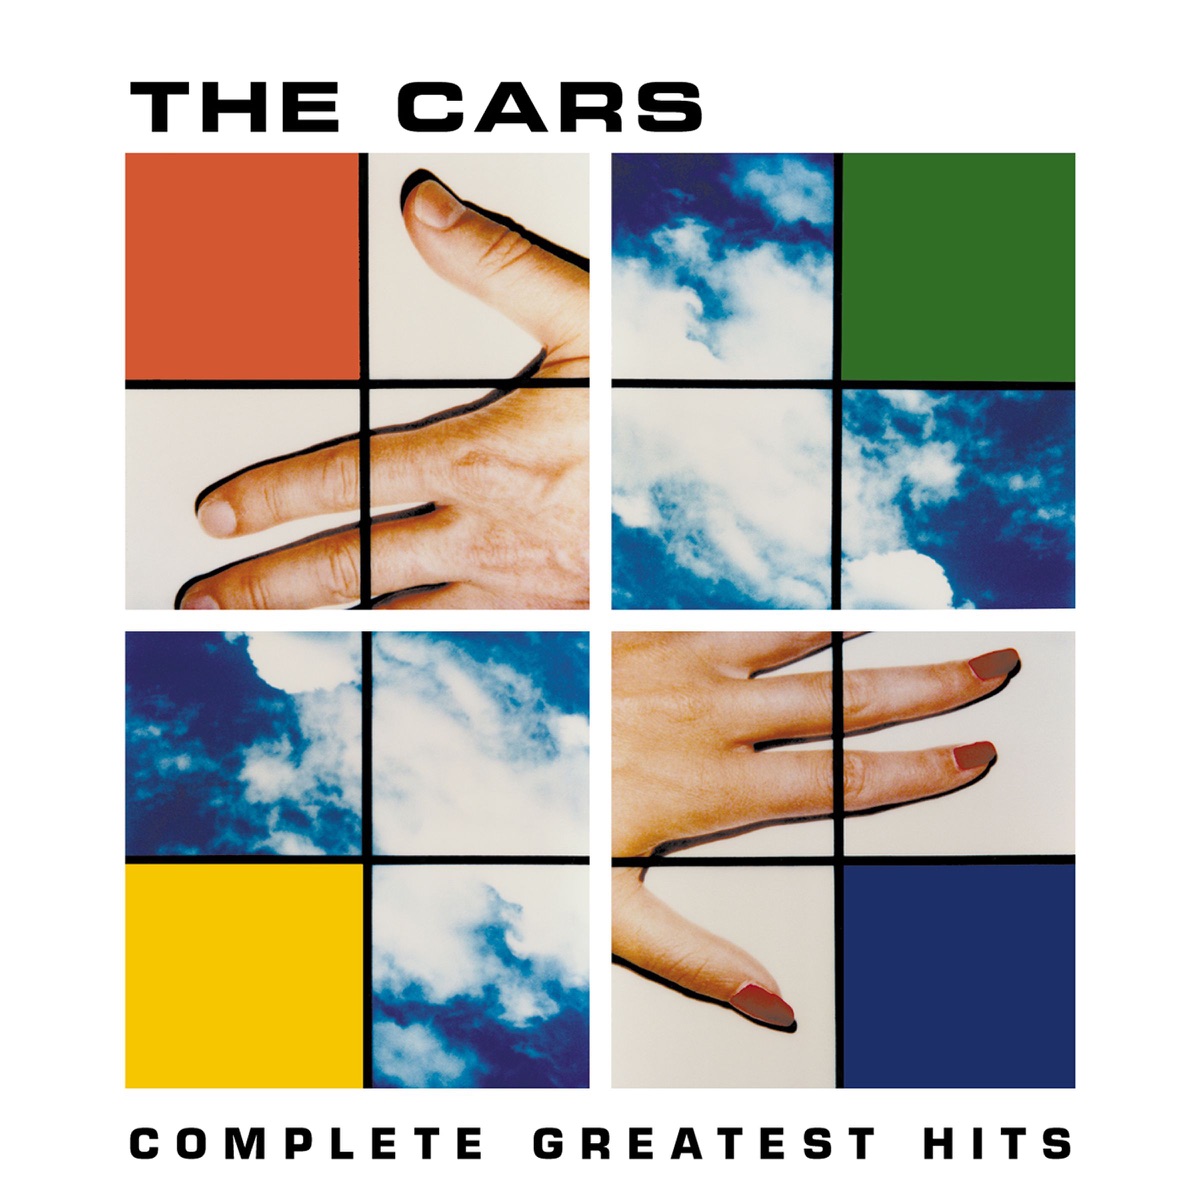 Complete Greatest Hits Album Cover by The Cars